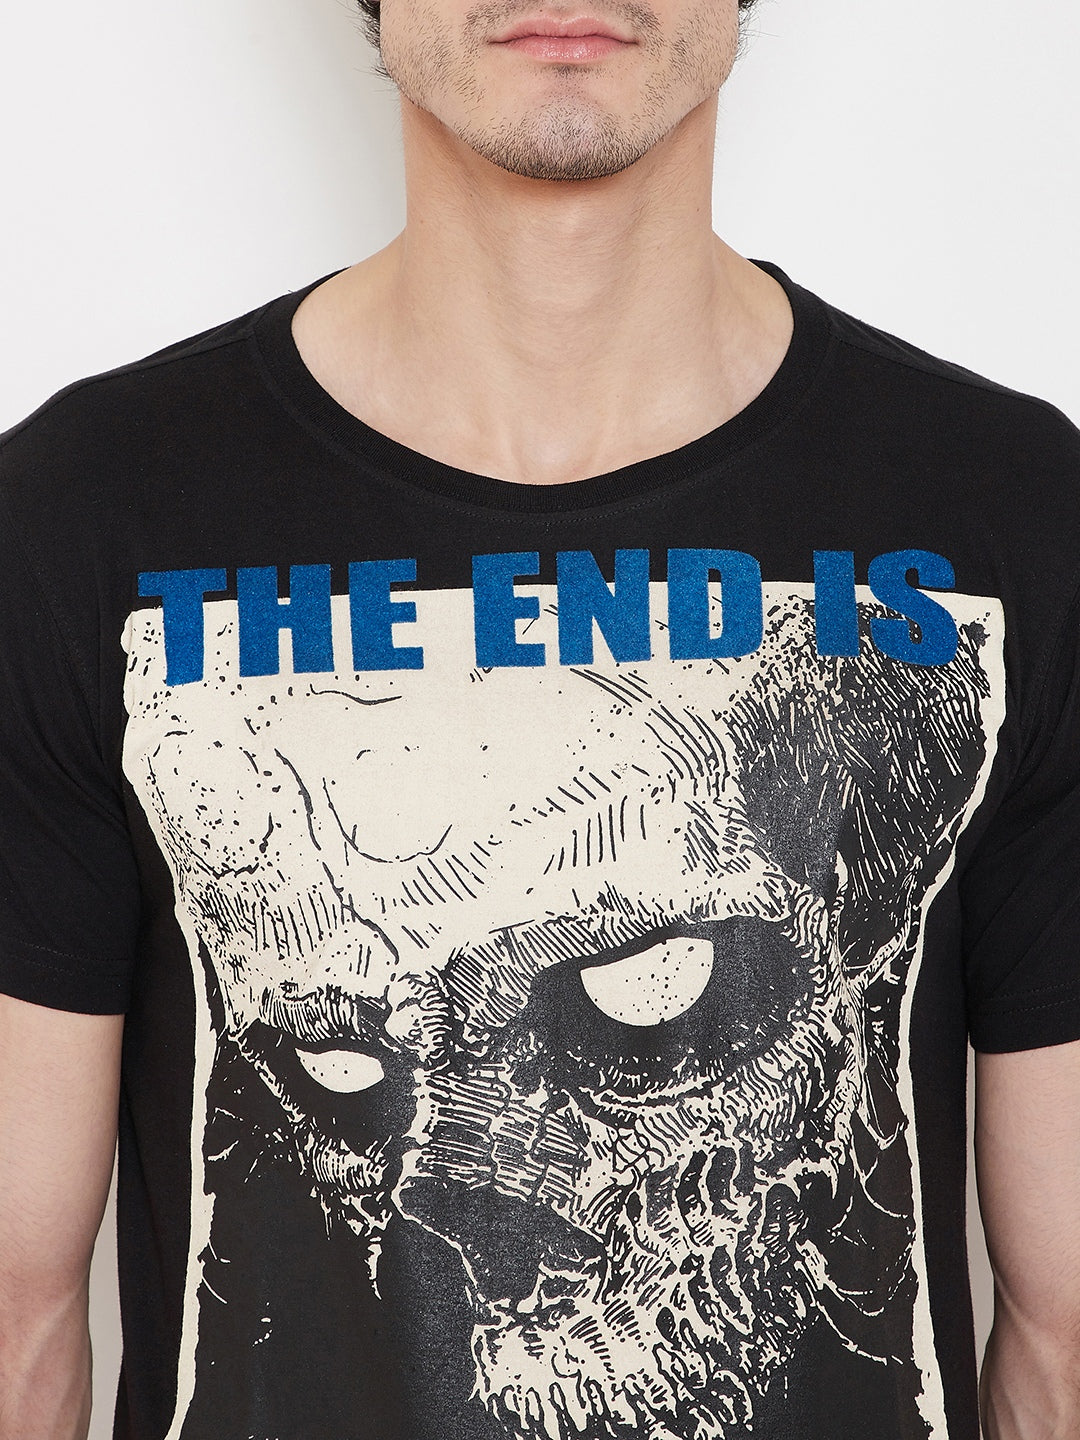 THE-END-IS-HERE